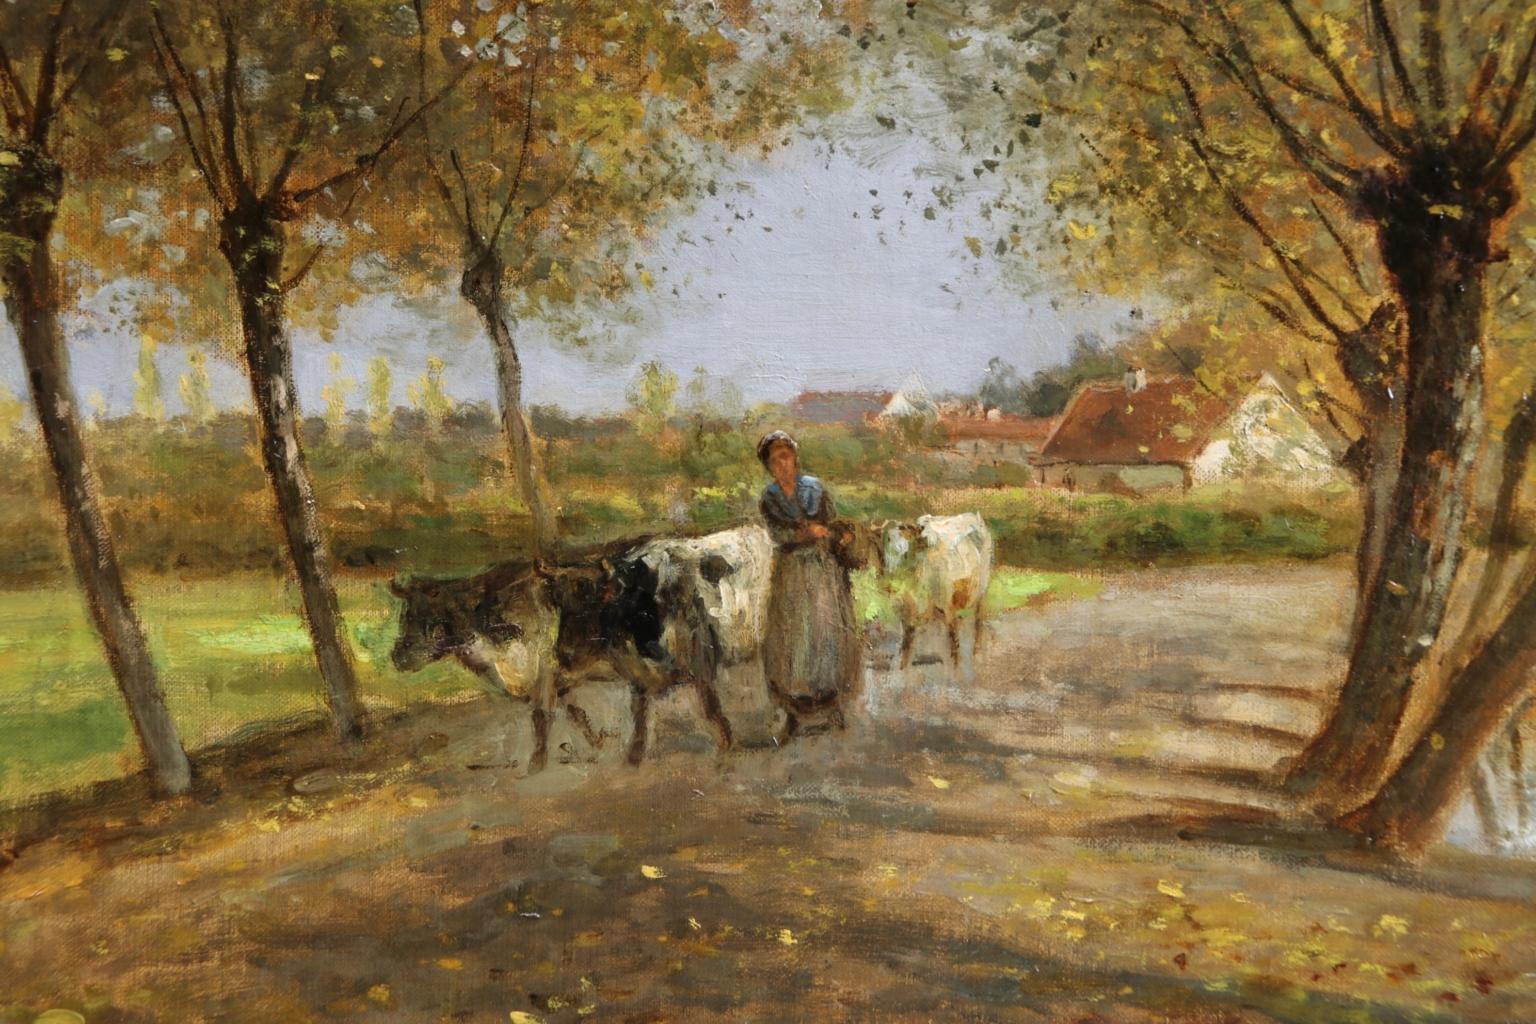 Oil on original canvas by French Barbizon painter Cesar De Cock, depicting a woman herding her cattle along a village path in a autumnal landscape scene. Signed and dated 1886 lower right. Framed dimensions are 28 inches high by 34 inches